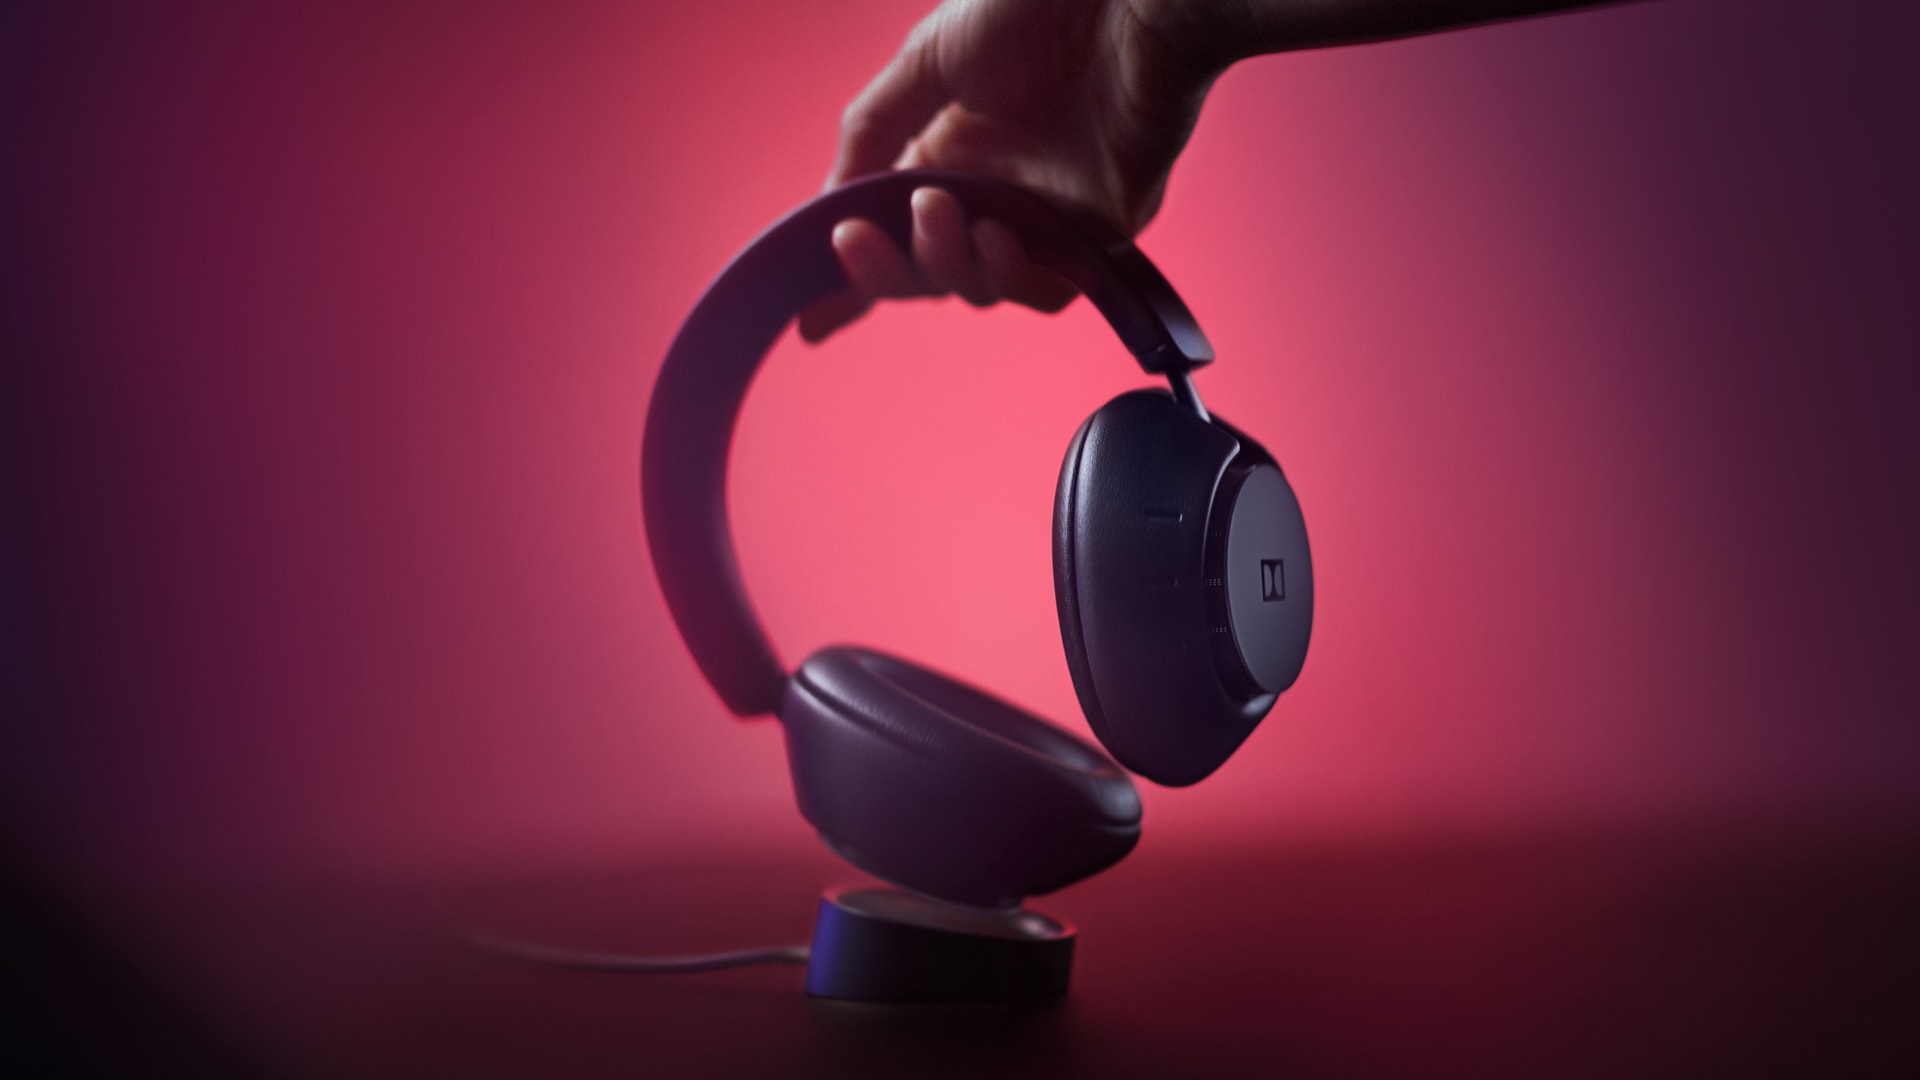 These ambitious headphones are Dolby’s first consumer product ever